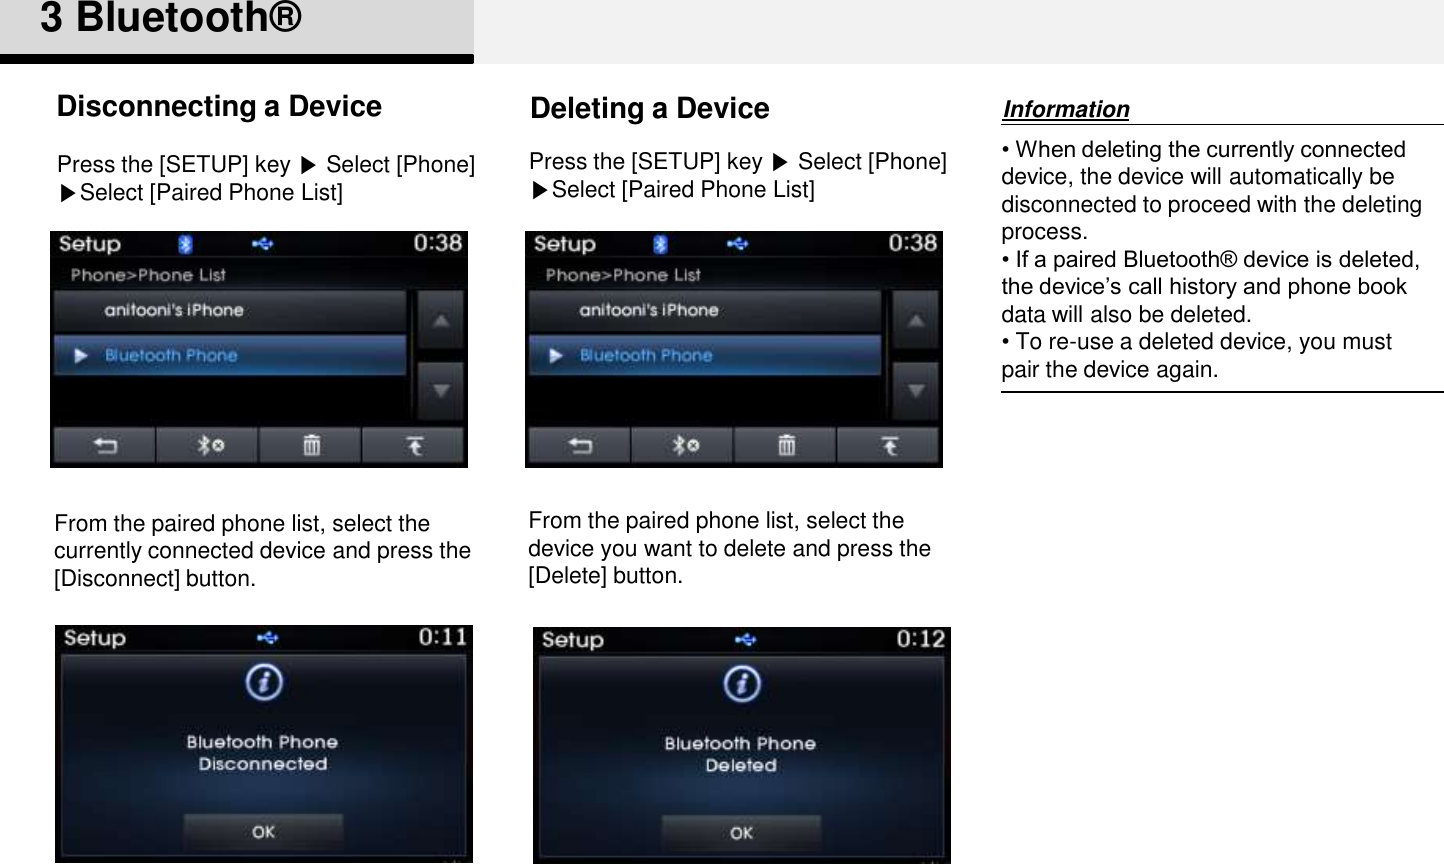 3 Bluetooth®From the paired phone list, select thecurrently connected device and press the [Disconnect] button.Disconnecting a Device• When deleting the currently connected device, the device will automatically be disconnected to proceed with the deleting process. • If a paired Bluetooth® device is deleted, the device‟s call history and phone book data will also be deleted.• To re-use a deleted device, you must pair the device again. From the paired phone list, select thedevice you want to delete and press the[Delete] button.InformationDeleting a DevicePress the [SETUP] key ▶Select [Phone] ▶Select [Paired Phone List]Press the [SETUP] key ▶Select [Phone] ▶Select [Paired Phone List]